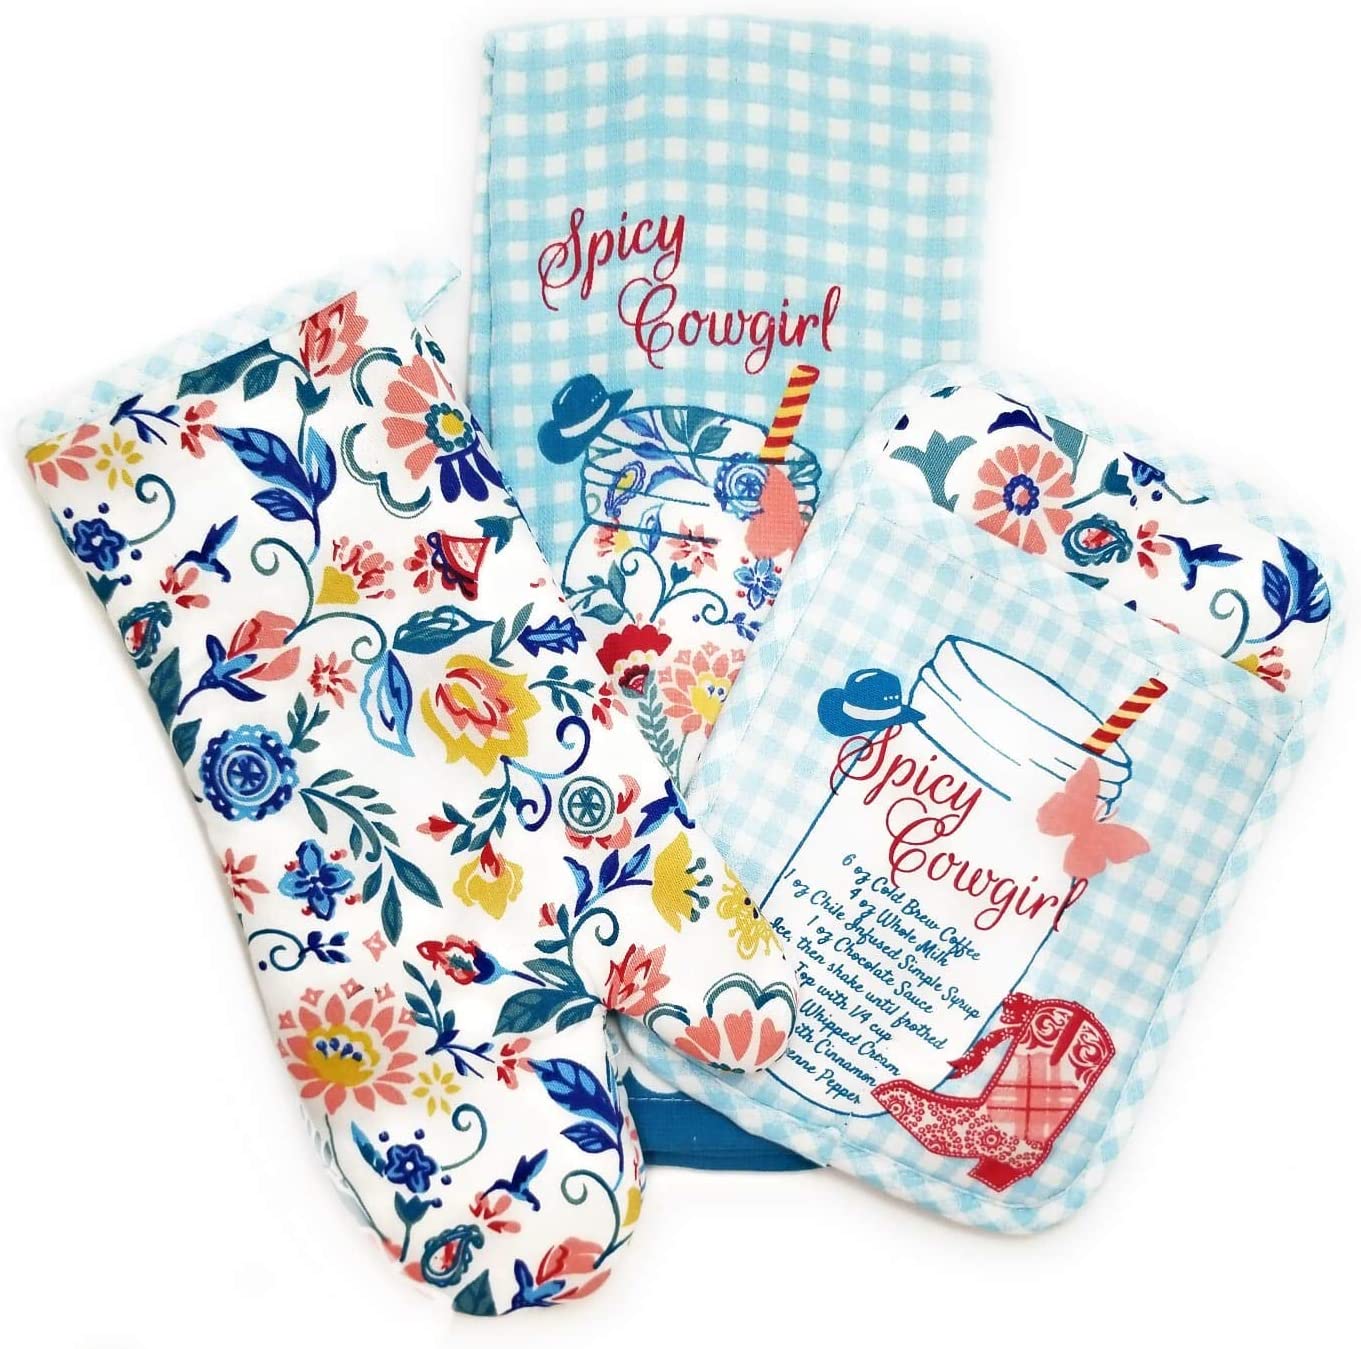 The Pioneer Woman Spicy Cowgirl Kitchen Towel Set-3 Pieces Including Oven Mitt, Pot Holder, Kitchen Towel Gift Set for Her